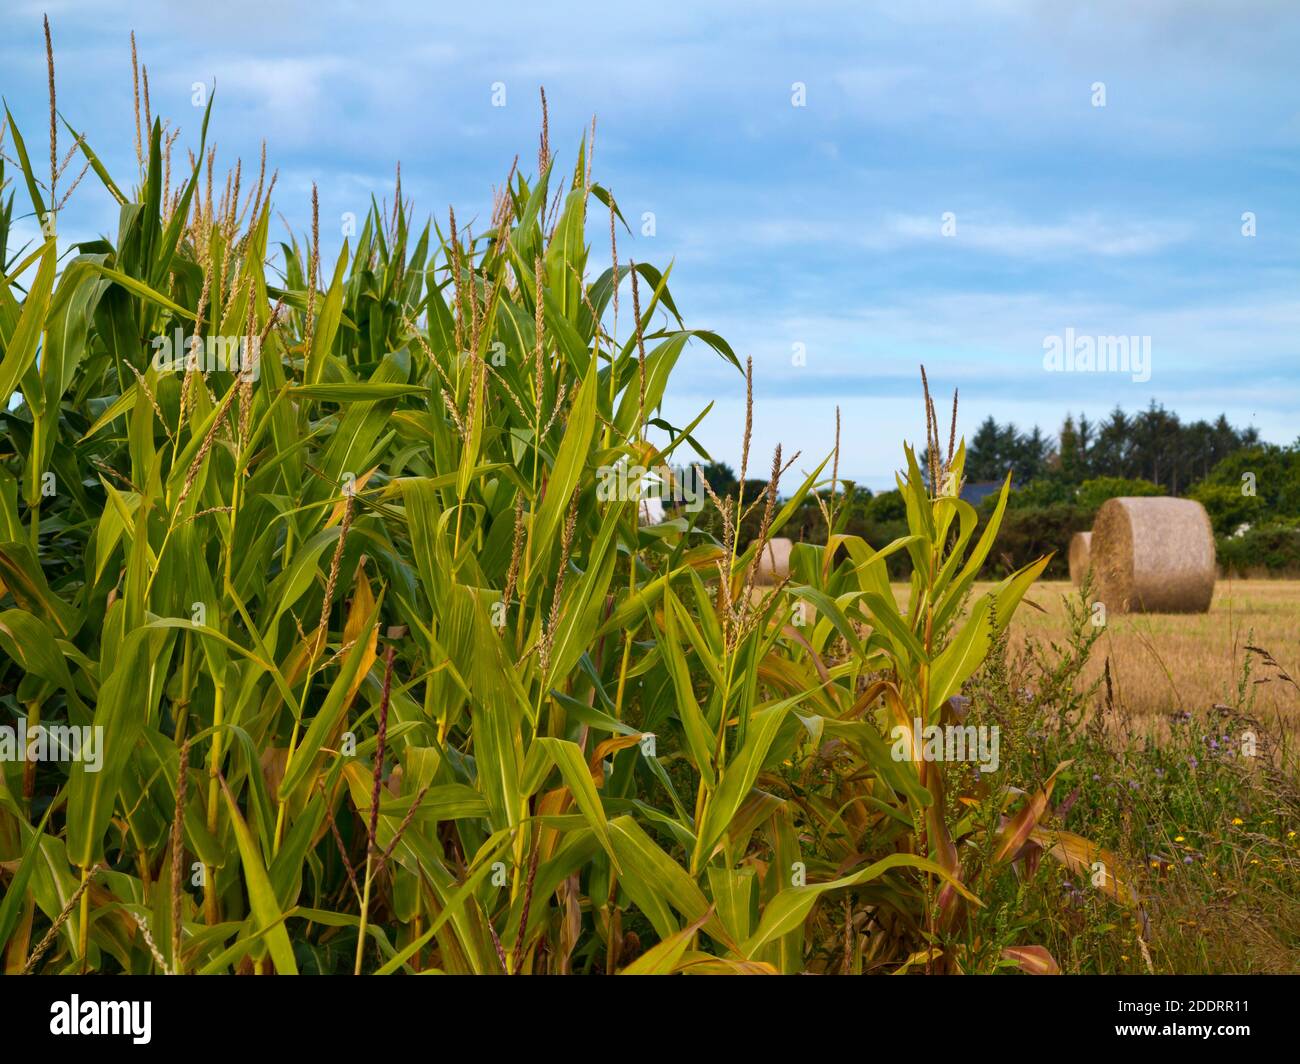 Field of maize or corn a cereal crop grown for food with hay bale visible in the background. Stock Photo